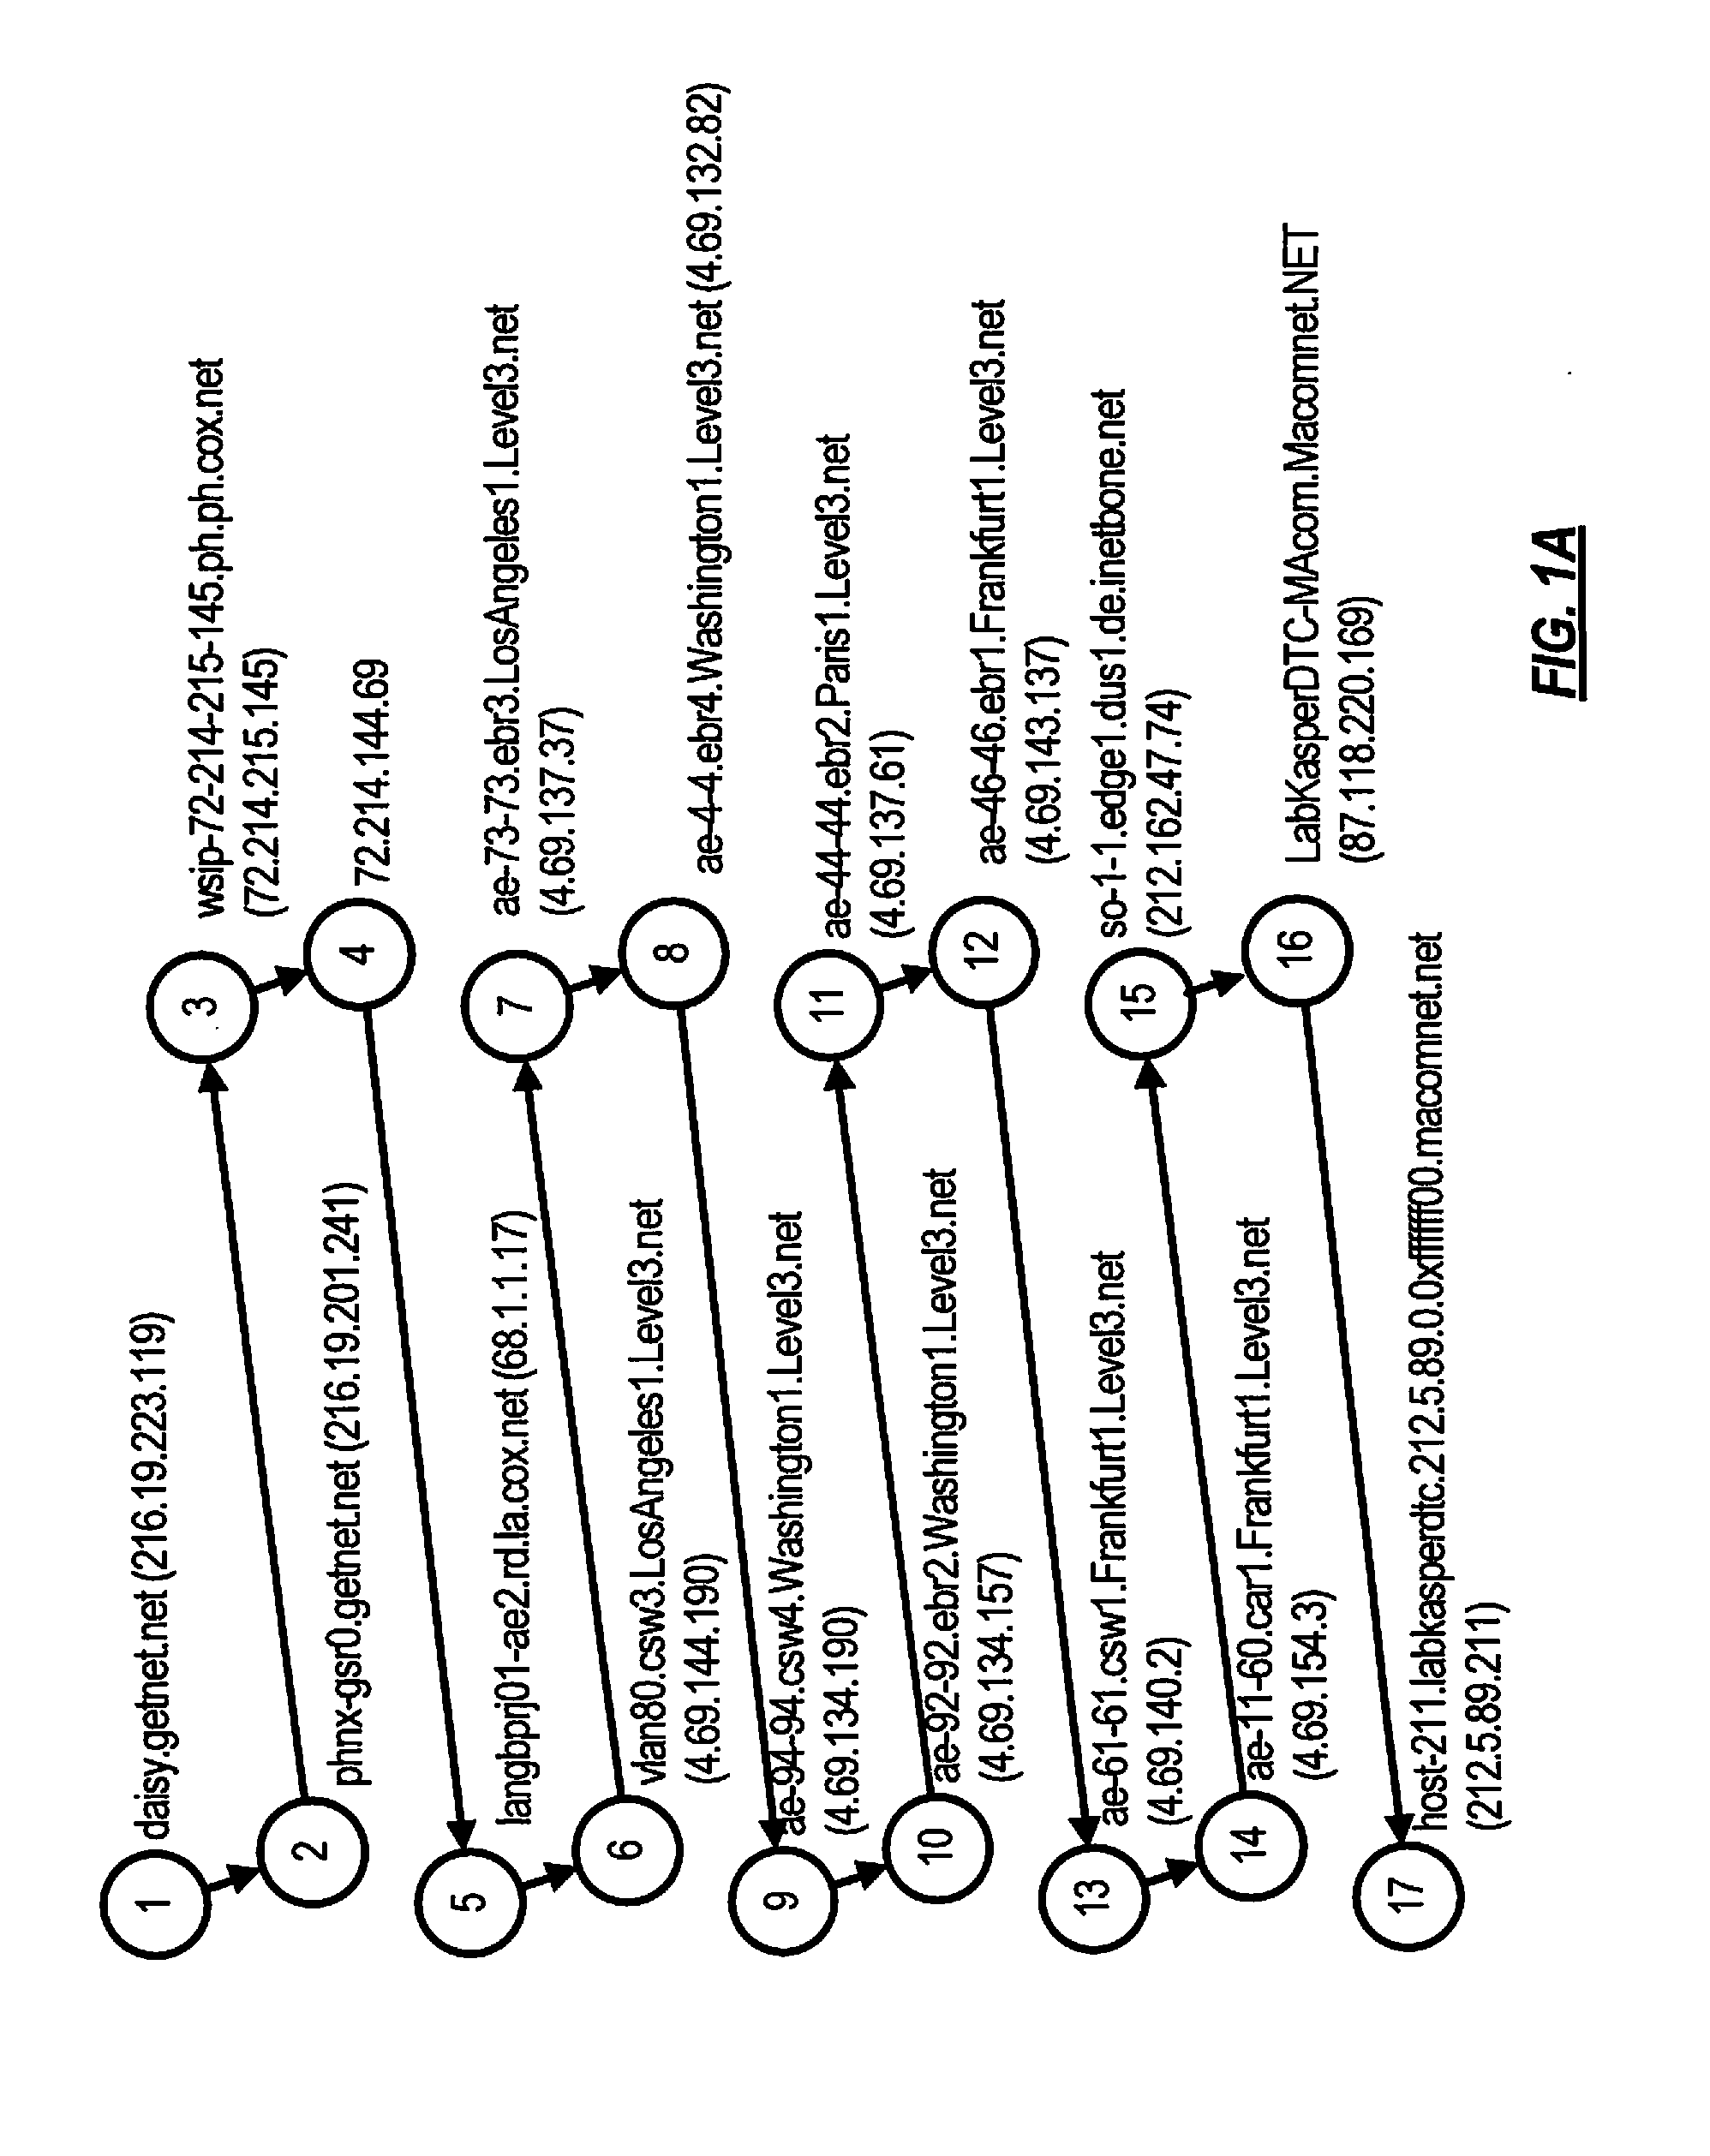 System and method for restricting pathways to harmful hosts in computer networks